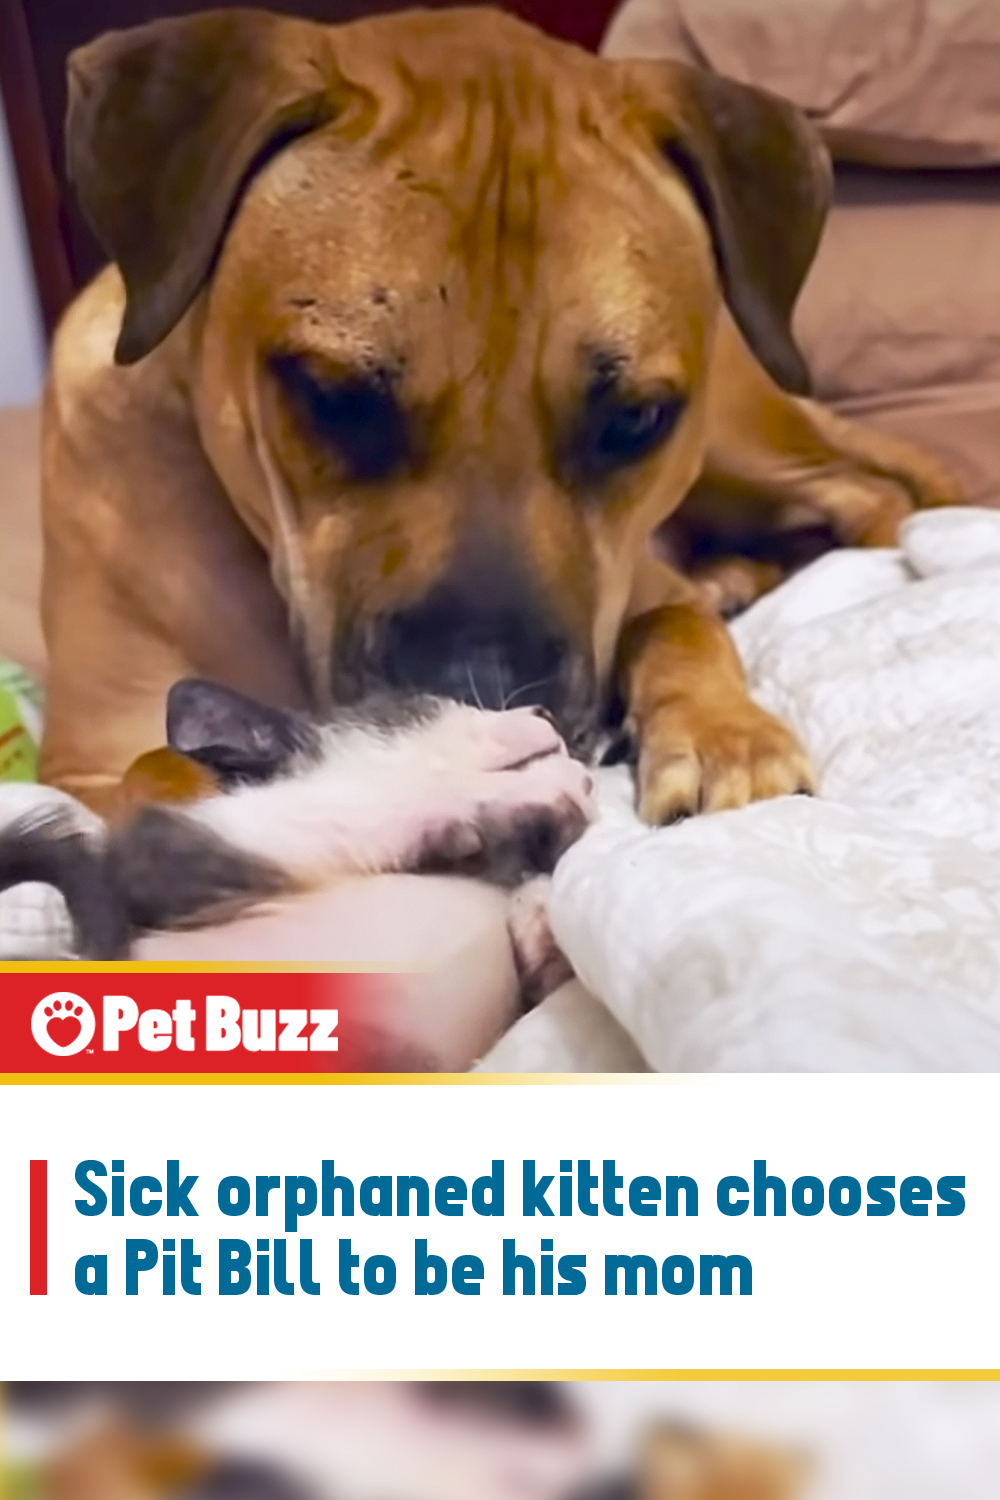 Sick orphaned kitten chooses a Pit Bill to be his mom